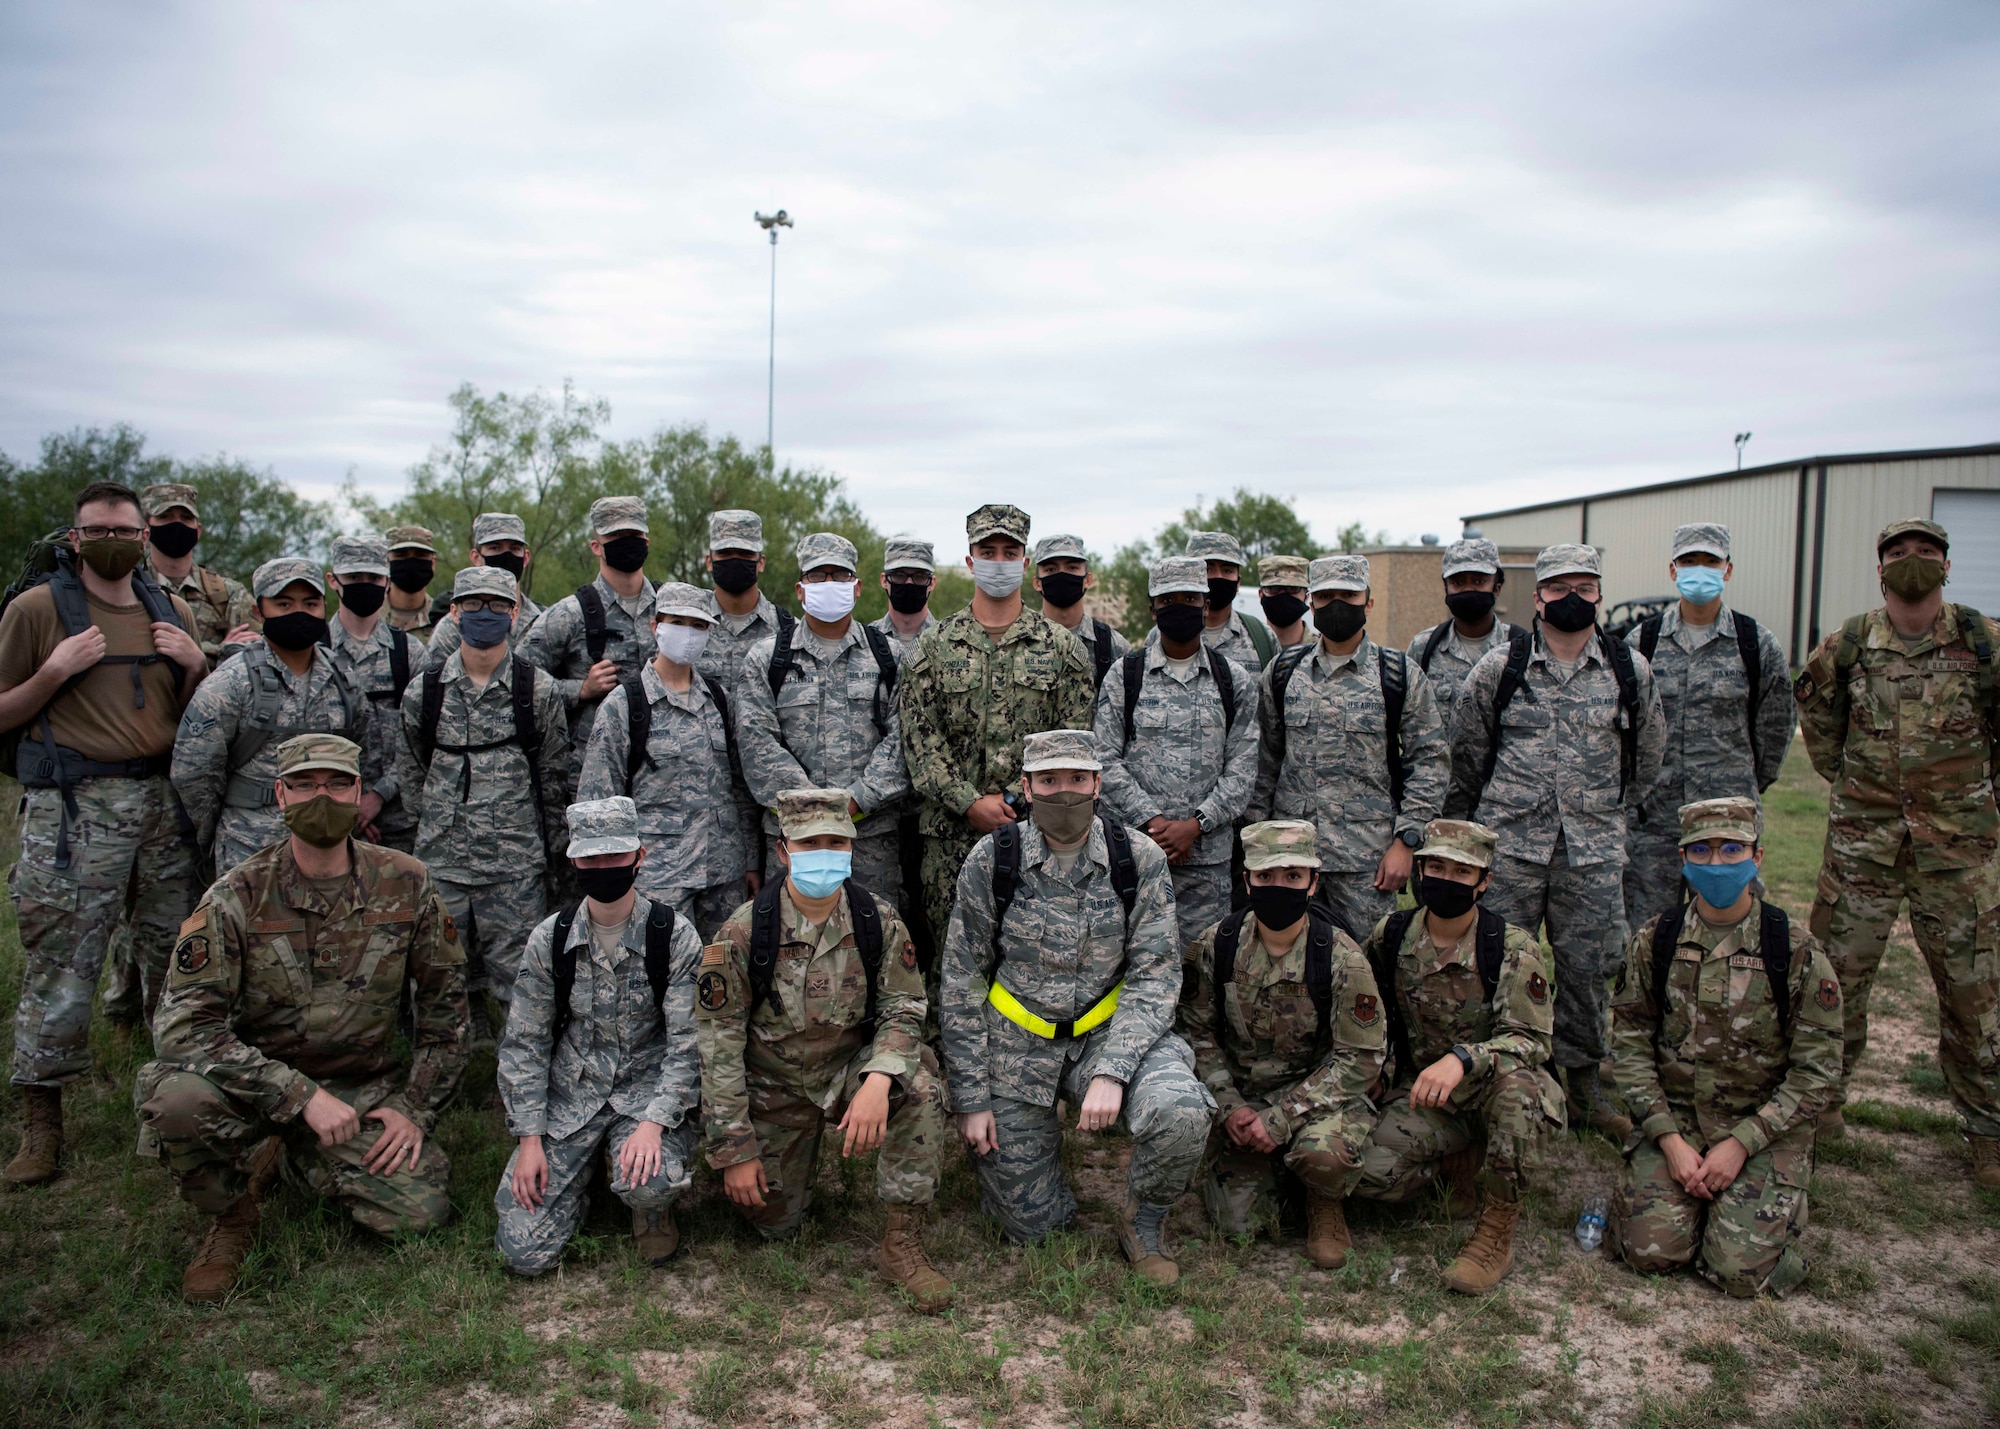 Goodfellow members pose for a post-ruck photo after the Jacobson Ruck March on Goodfellow Air Force Base, Texas, Sept. 28, 2020. Each member filled a rucksack with canned food to donate to a local food bank. (U.S. Air Force photo by Airman 1st Class Michael Bowman)